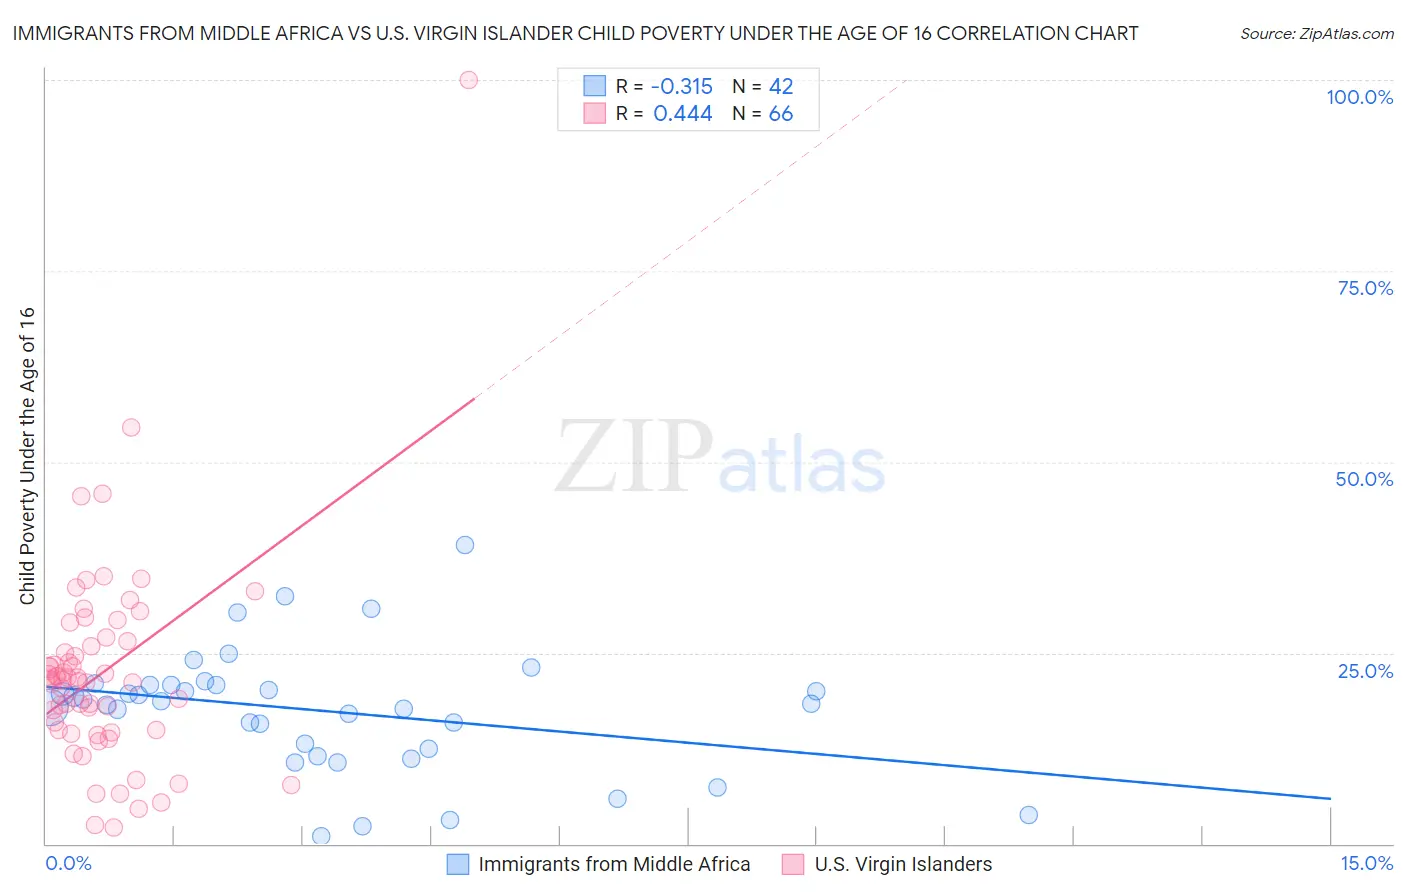 Immigrants from Middle Africa vs U.S. Virgin Islander Child Poverty Under the Age of 16